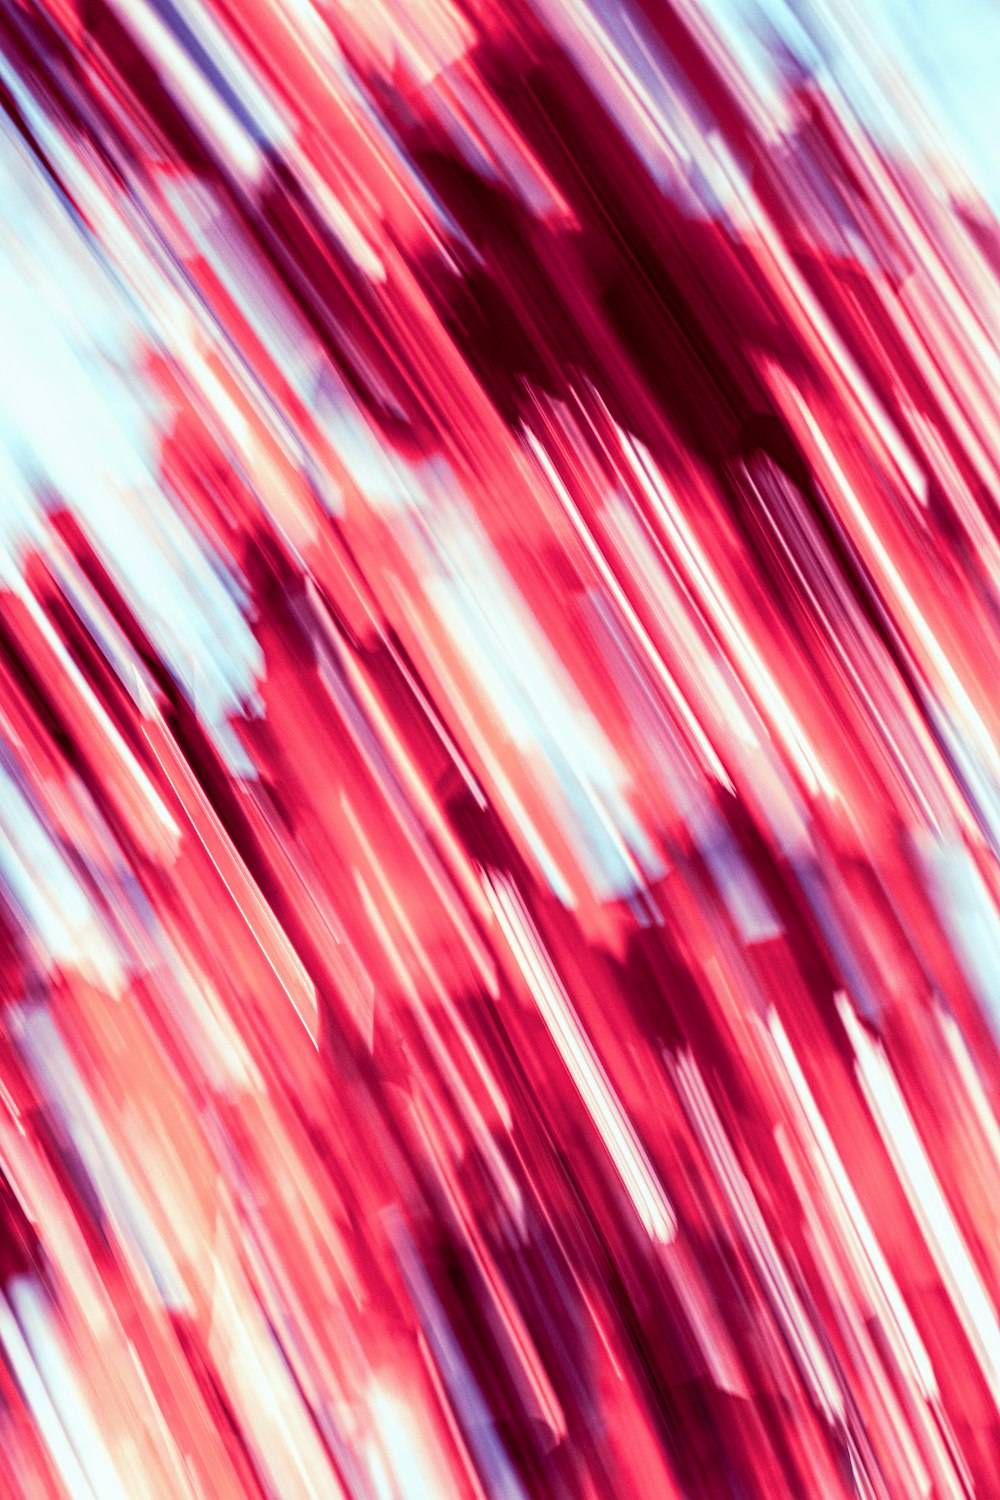 a blurry image of red and white lines